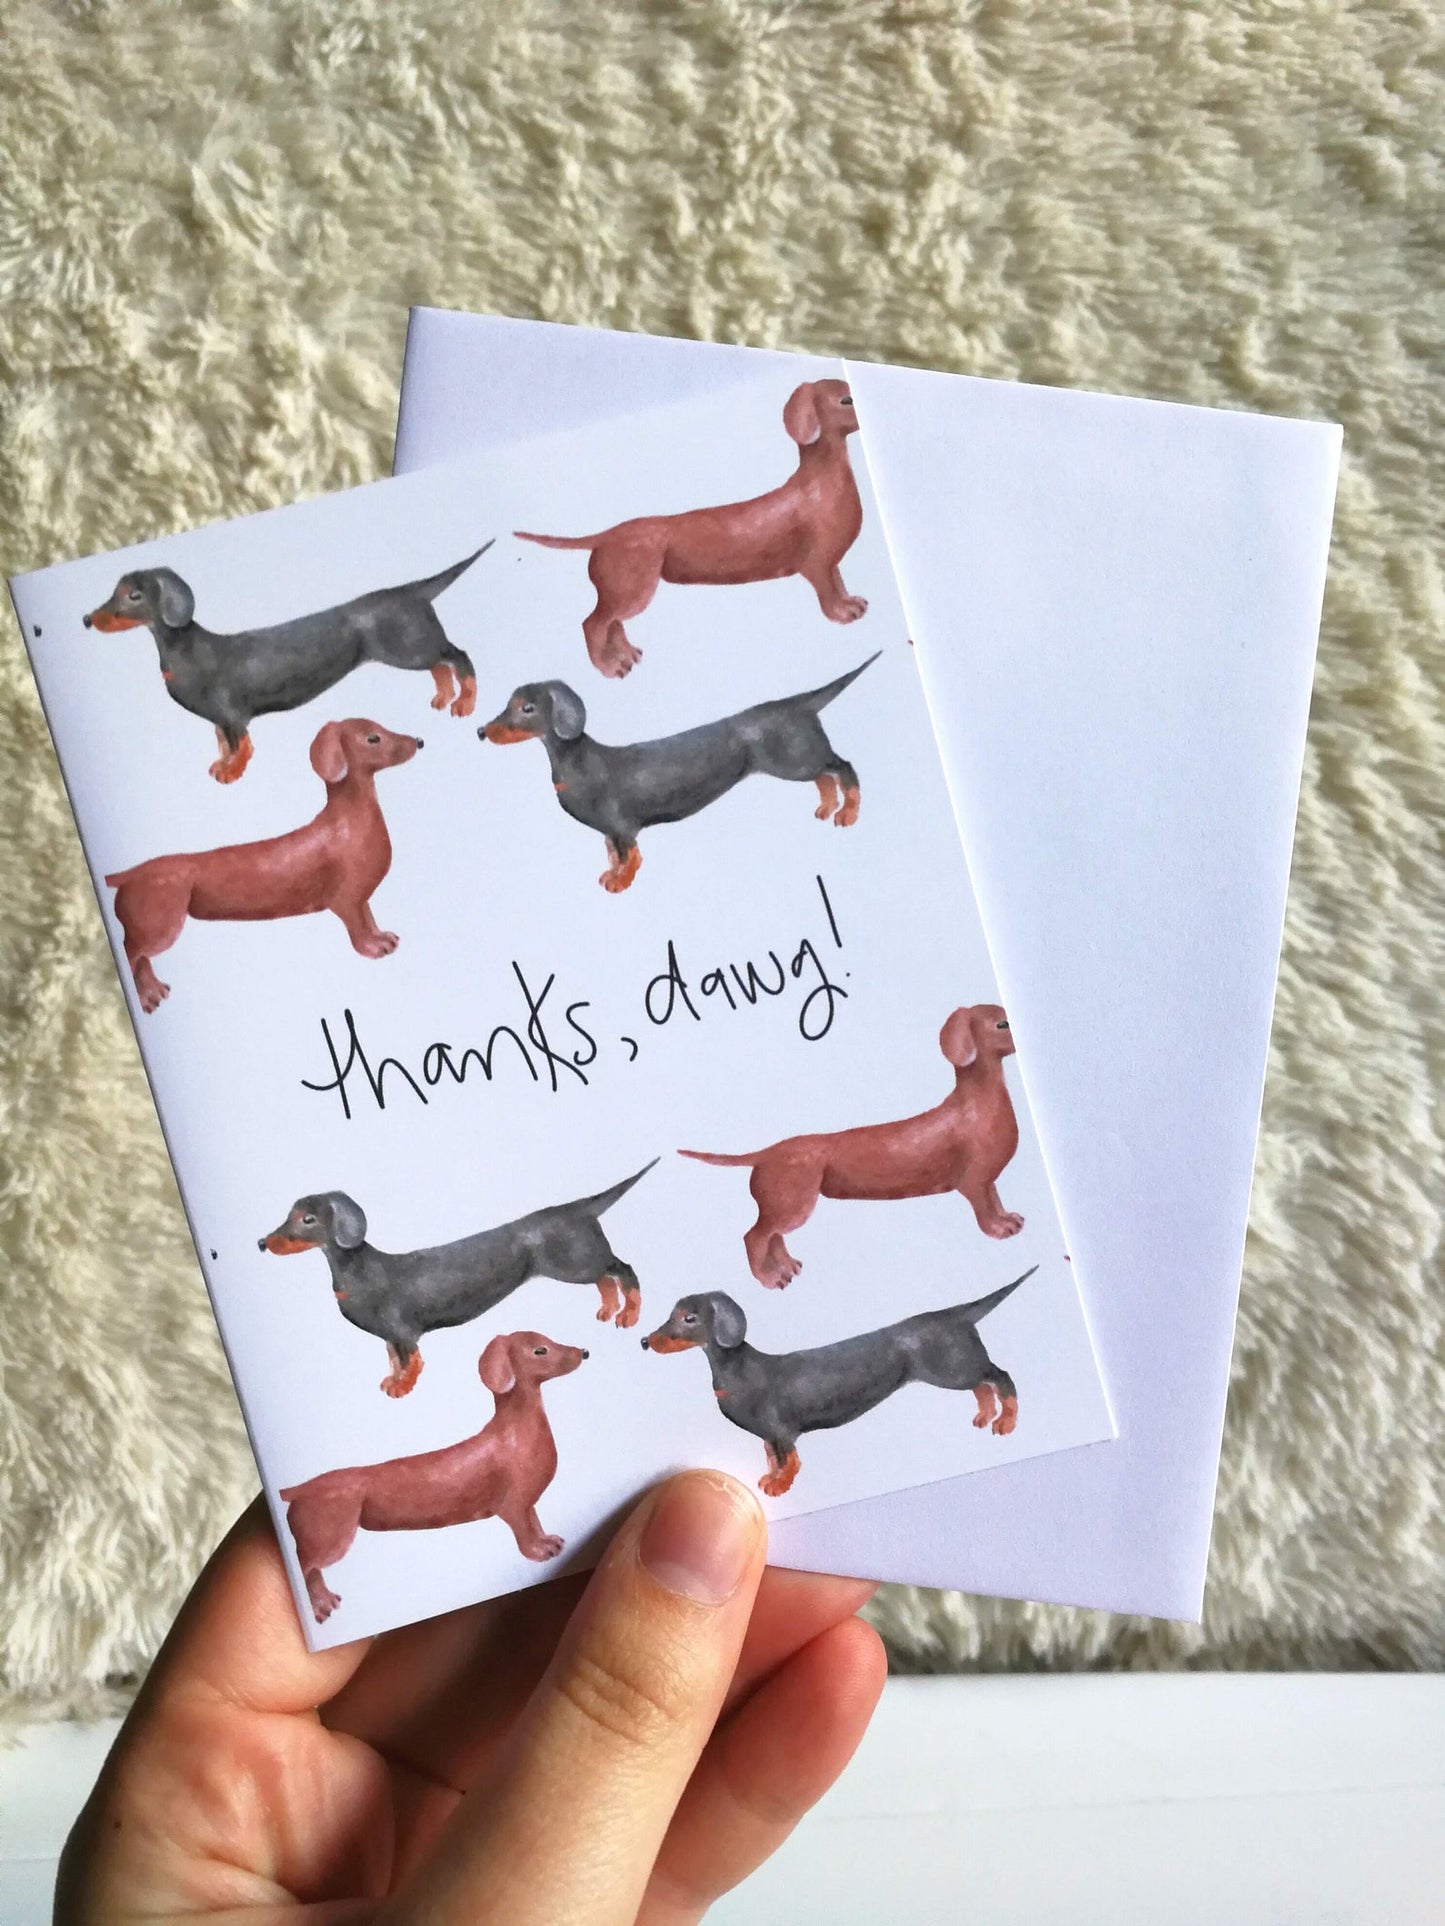 Watercolour Thank You Dachshund "Thanks Dawg" Greeting Card - 100% Recycled Paper